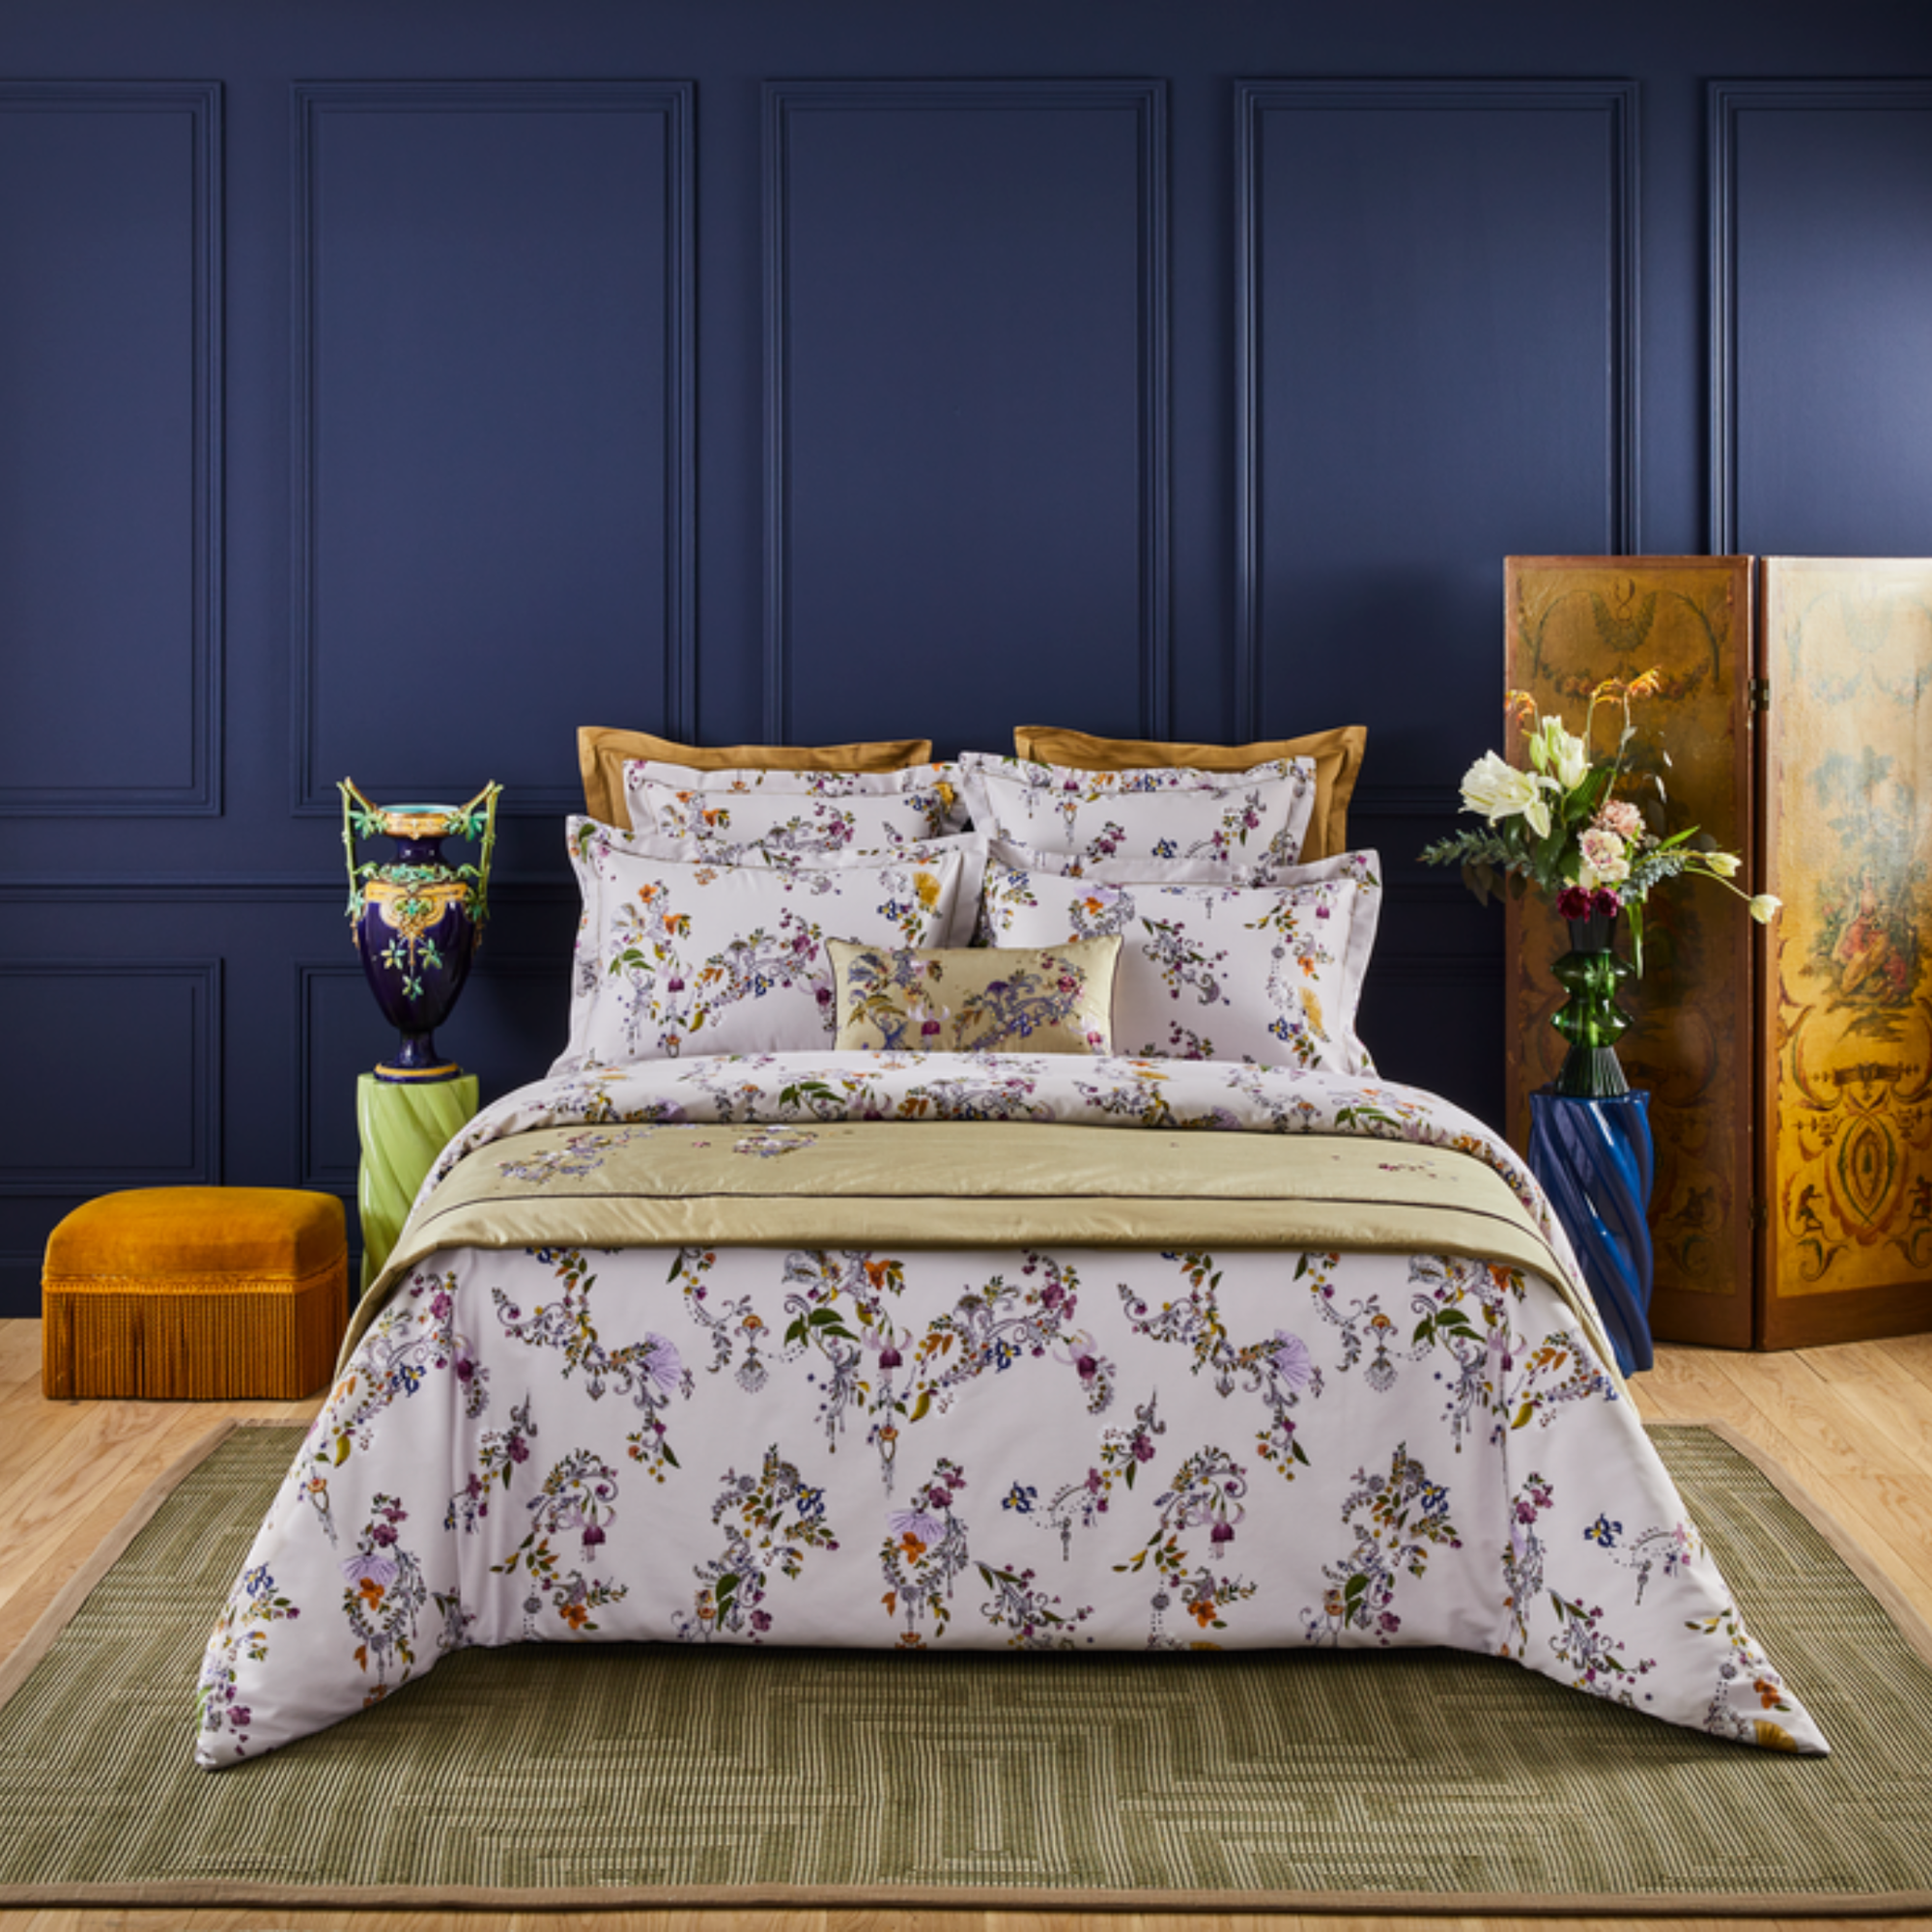 Full Bed Dressed in Yves Delorme Romances Bedding